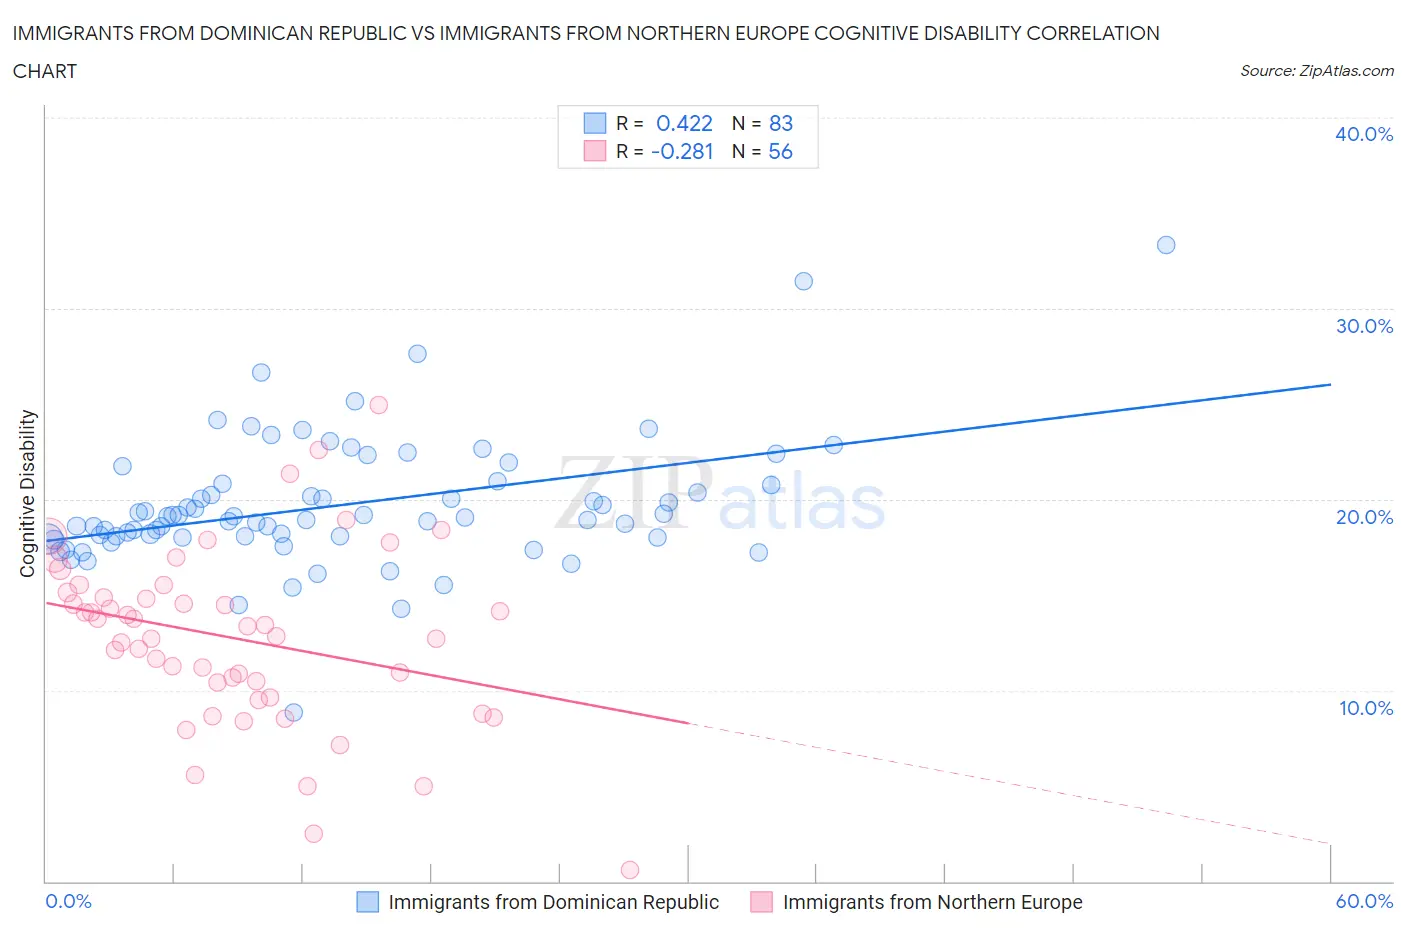 Immigrants from Dominican Republic vs Immigrants from Northern Europe Cognitive Disability